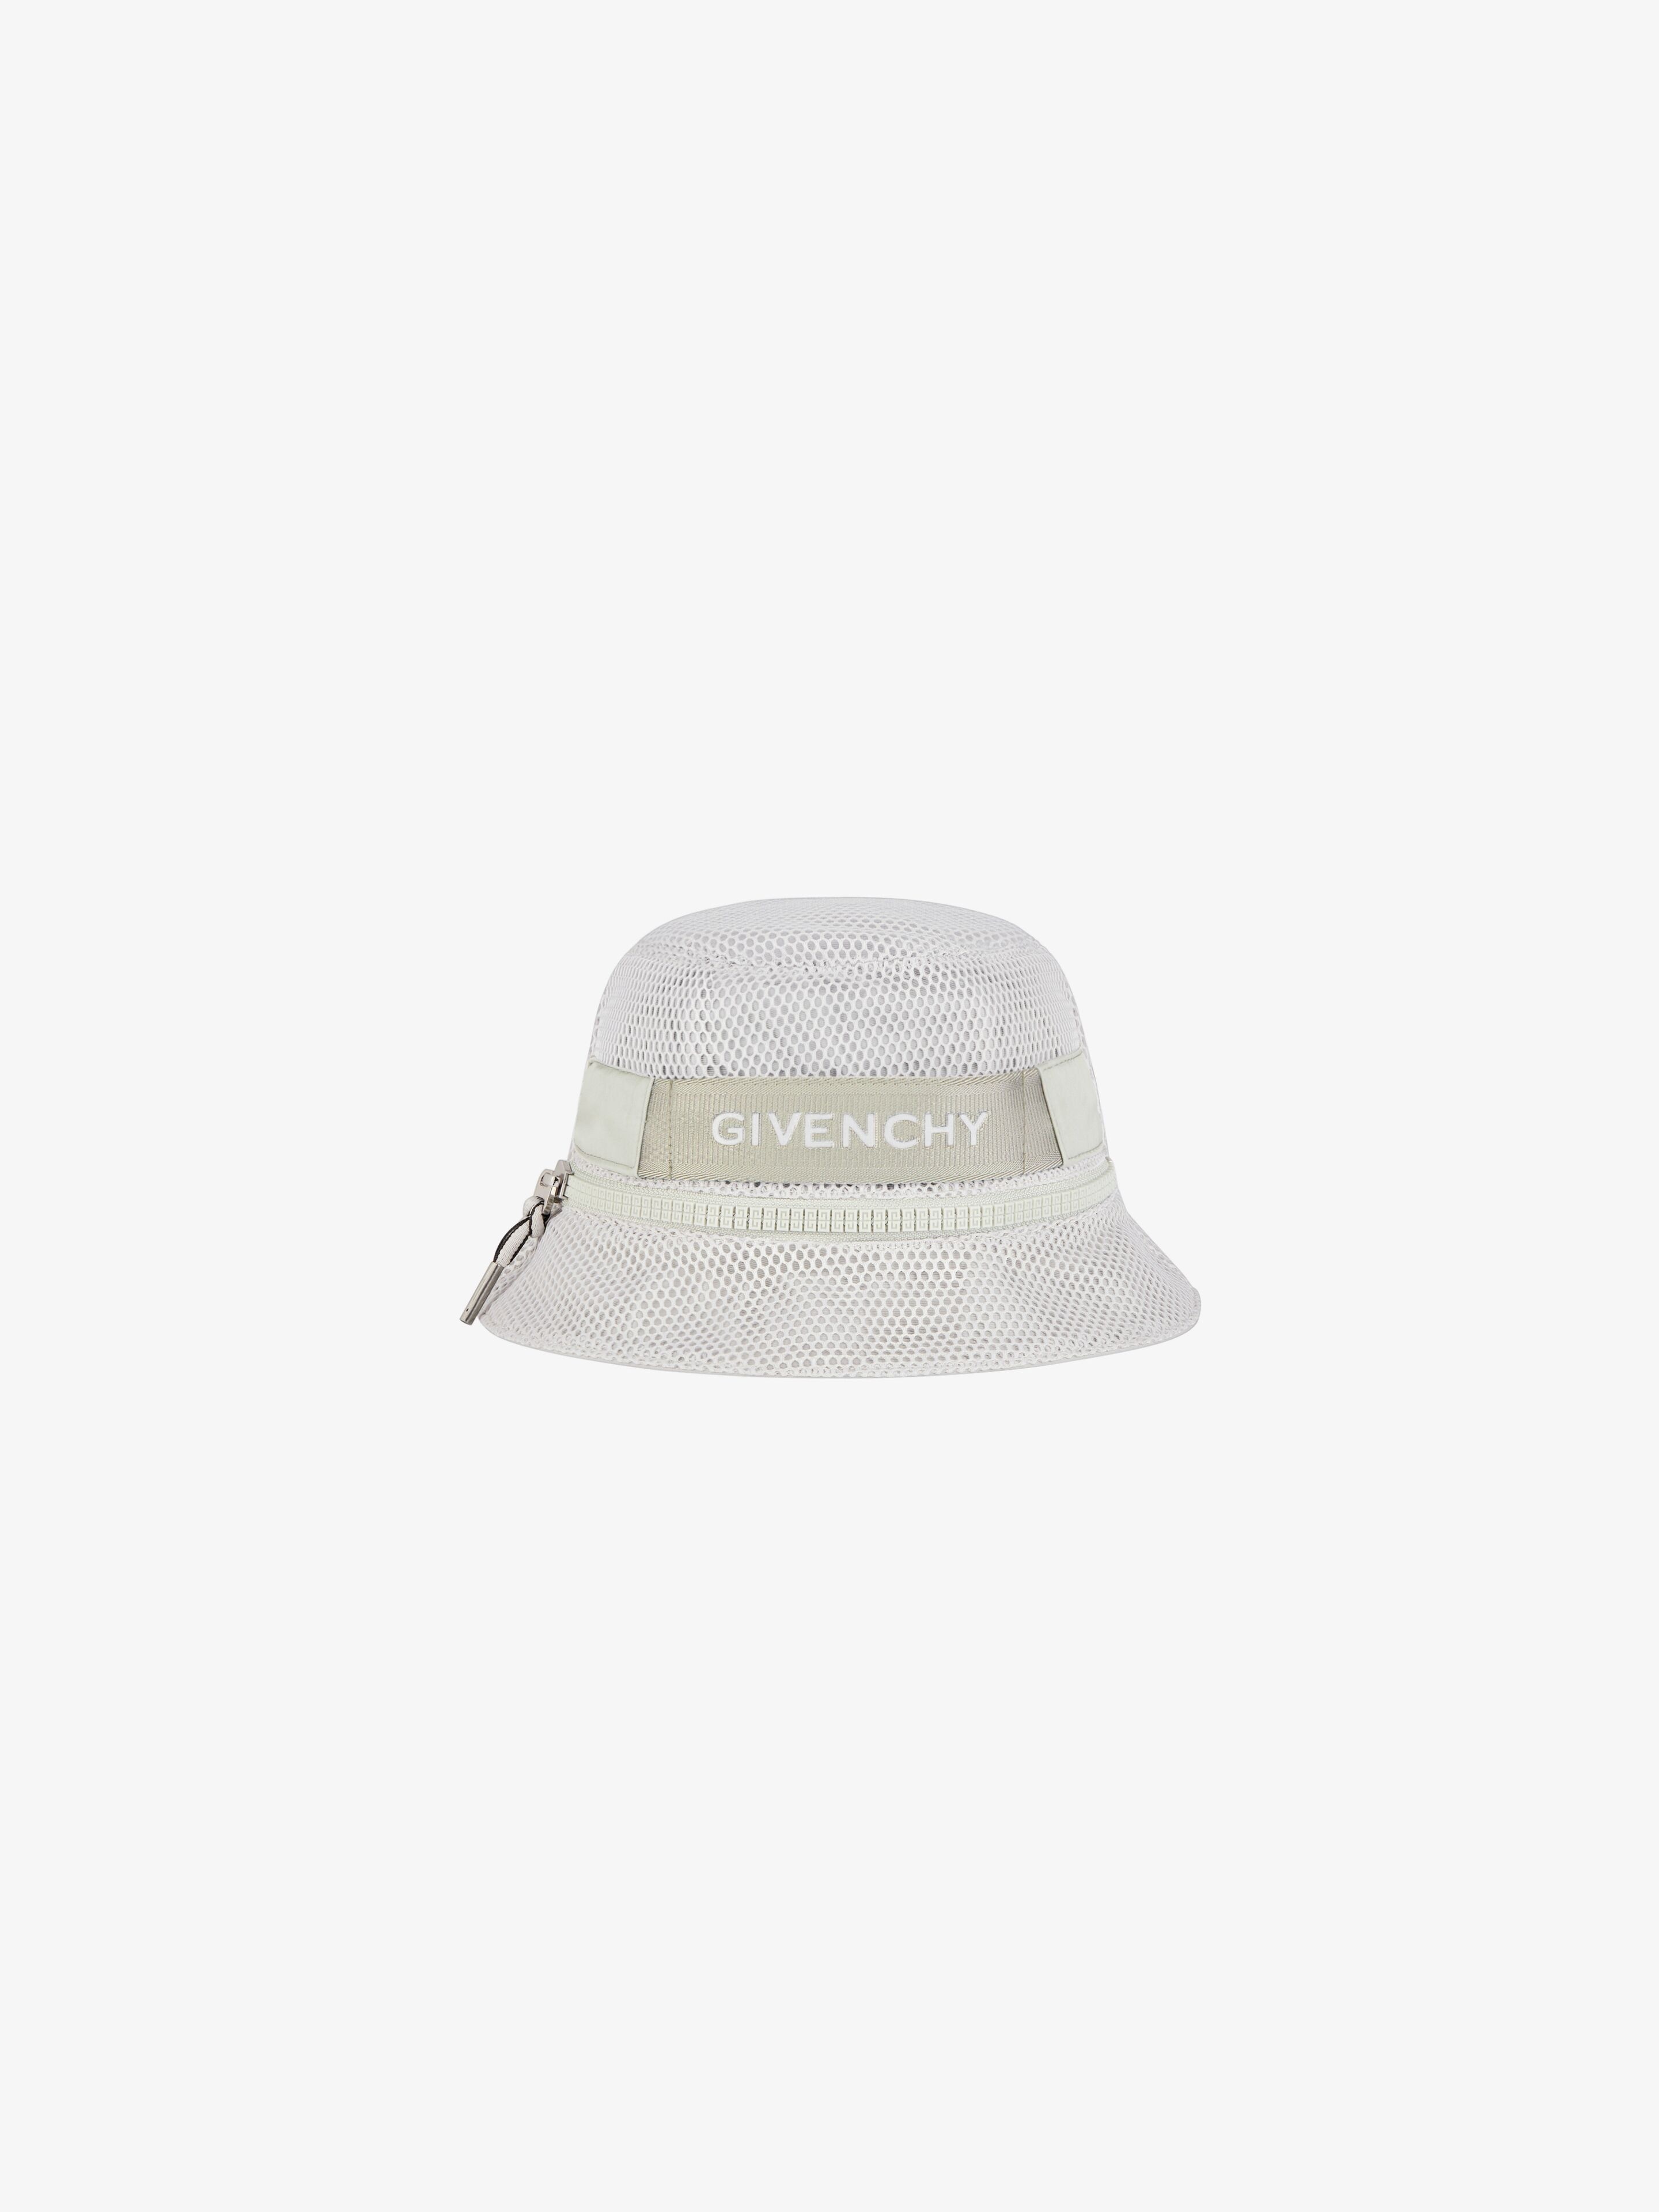 GIVENCHY BUCKET HAT IN MESH WITH ZIP - 1